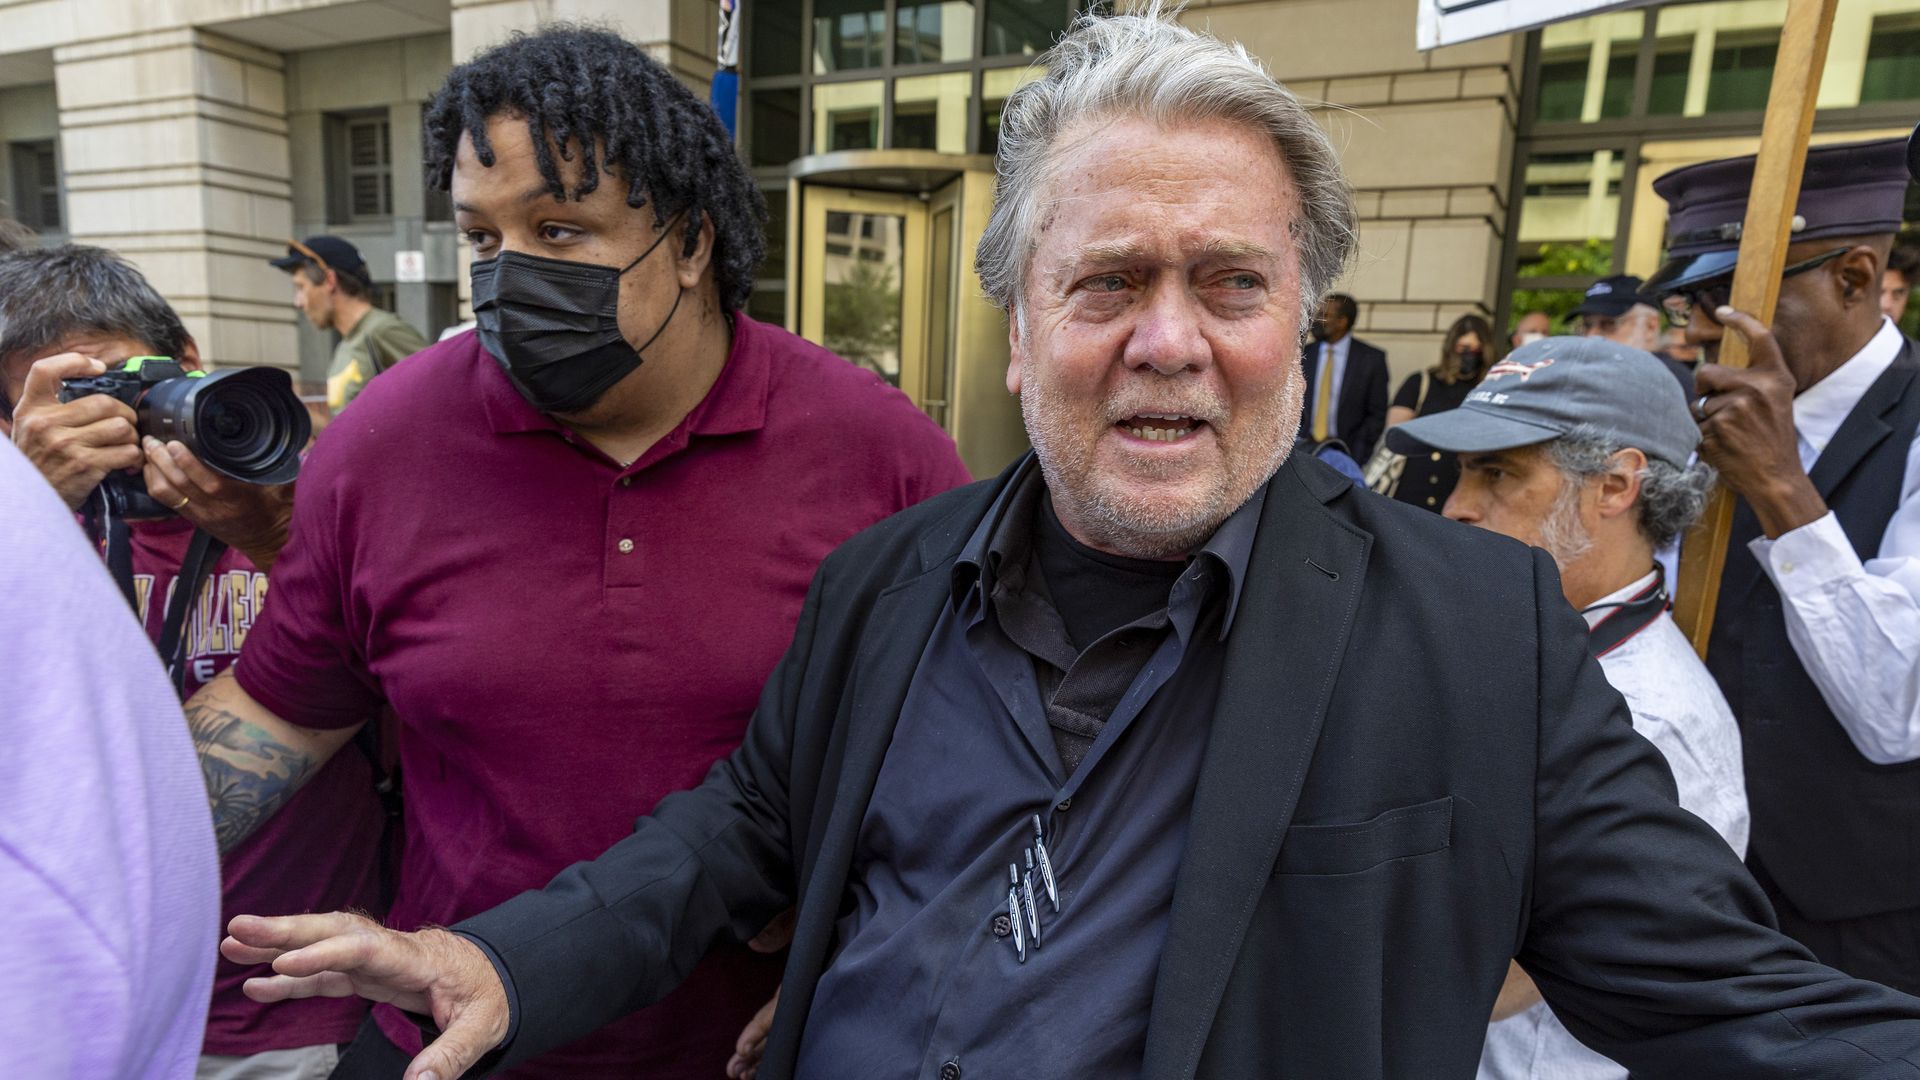 Former White House senior strategist Stephen Bannon leaves the Federal District Court House after being found guilty of being in comtempt of Congress on July 22.